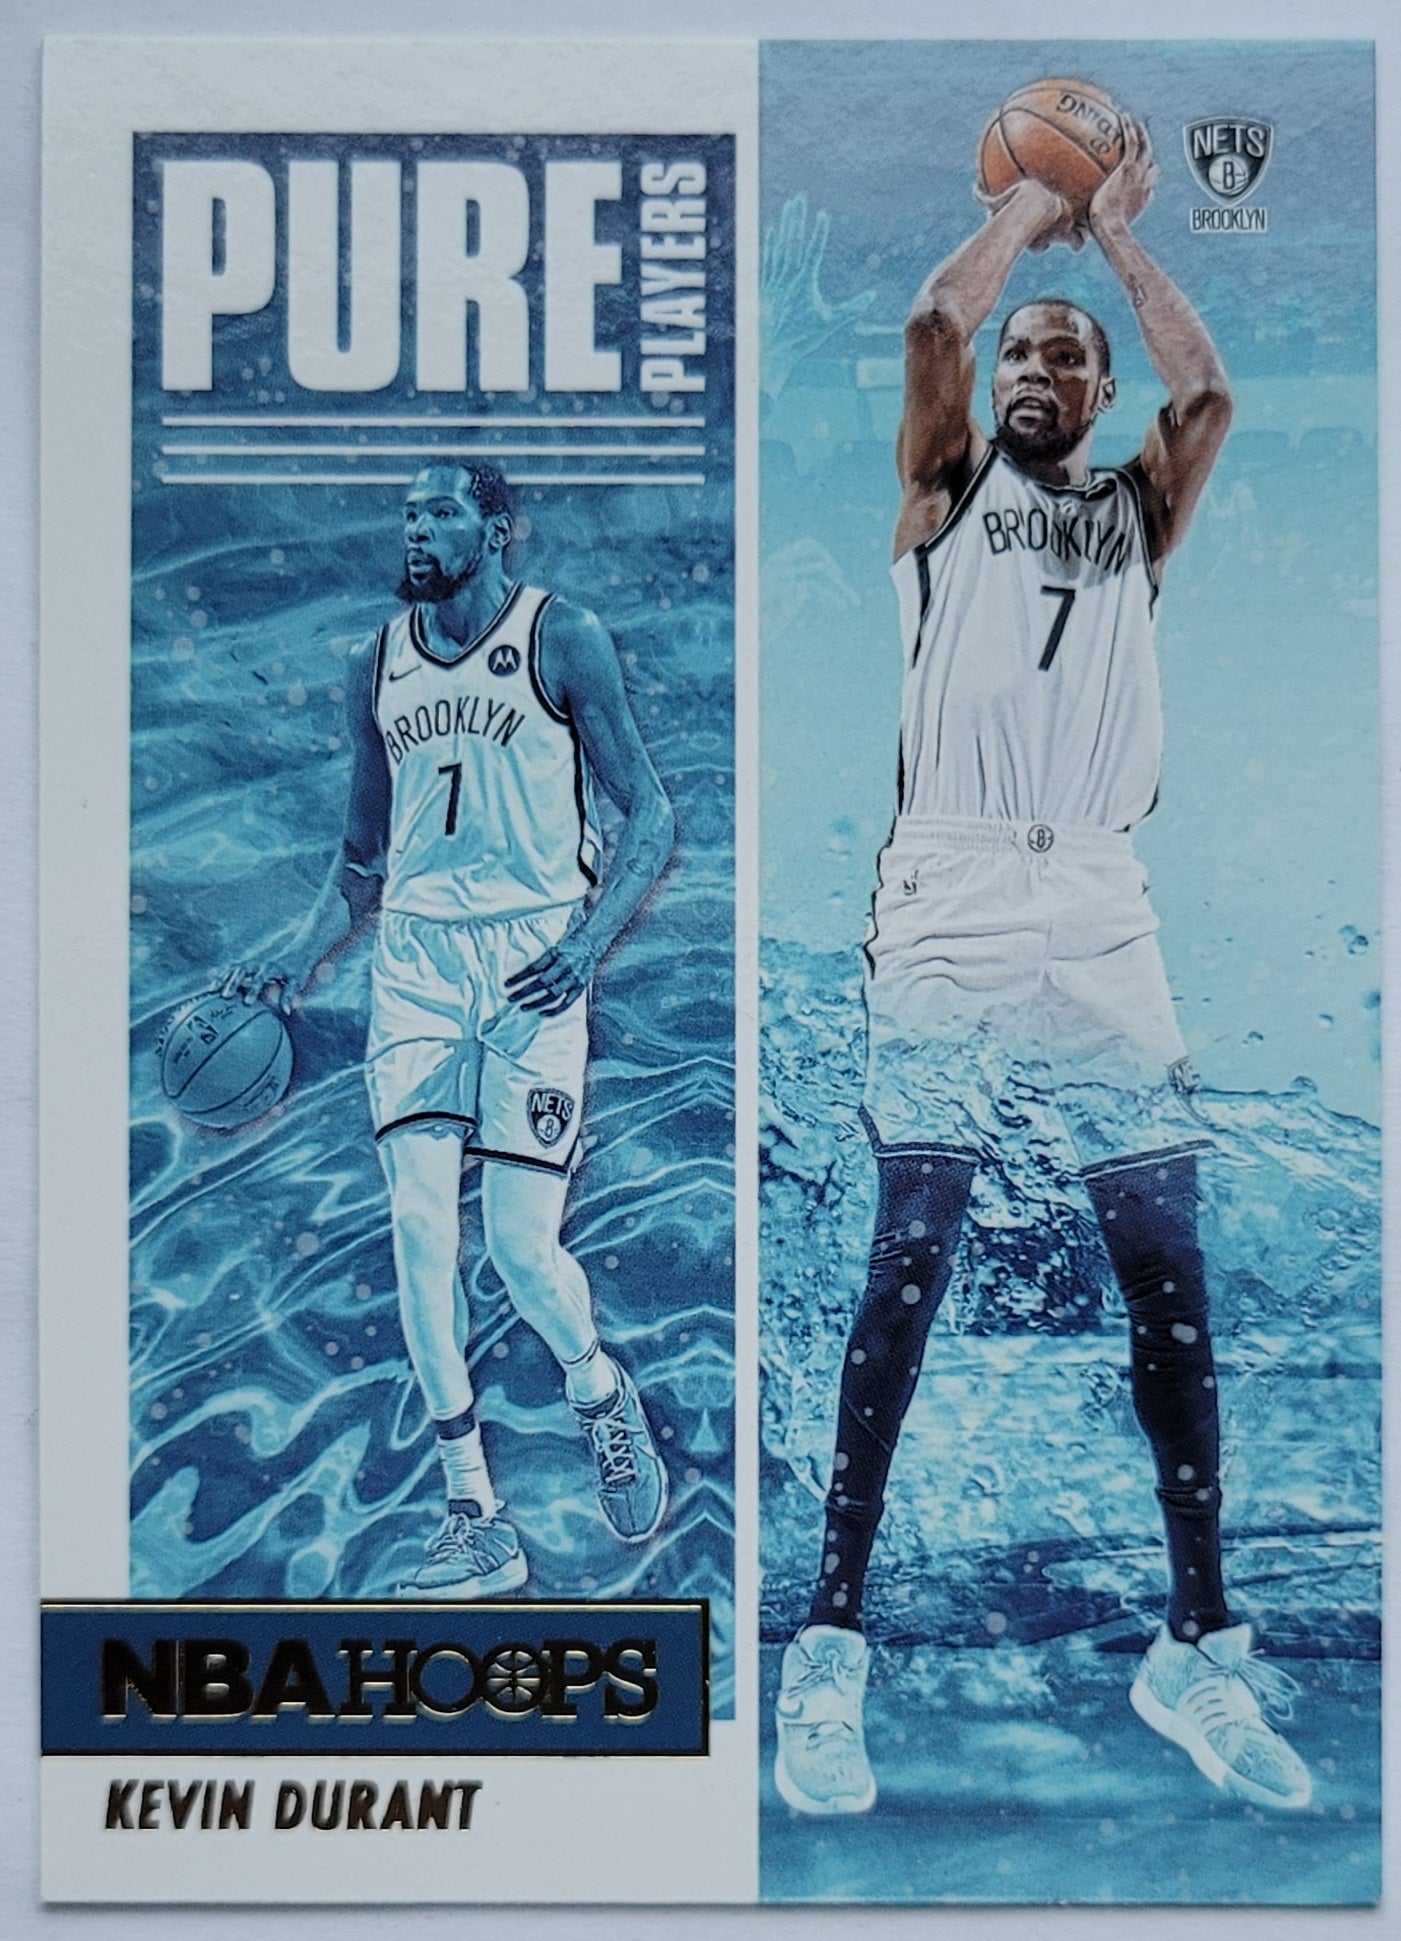 Kevin Durant - 2021-22 Hoops Pure Players Winter #10